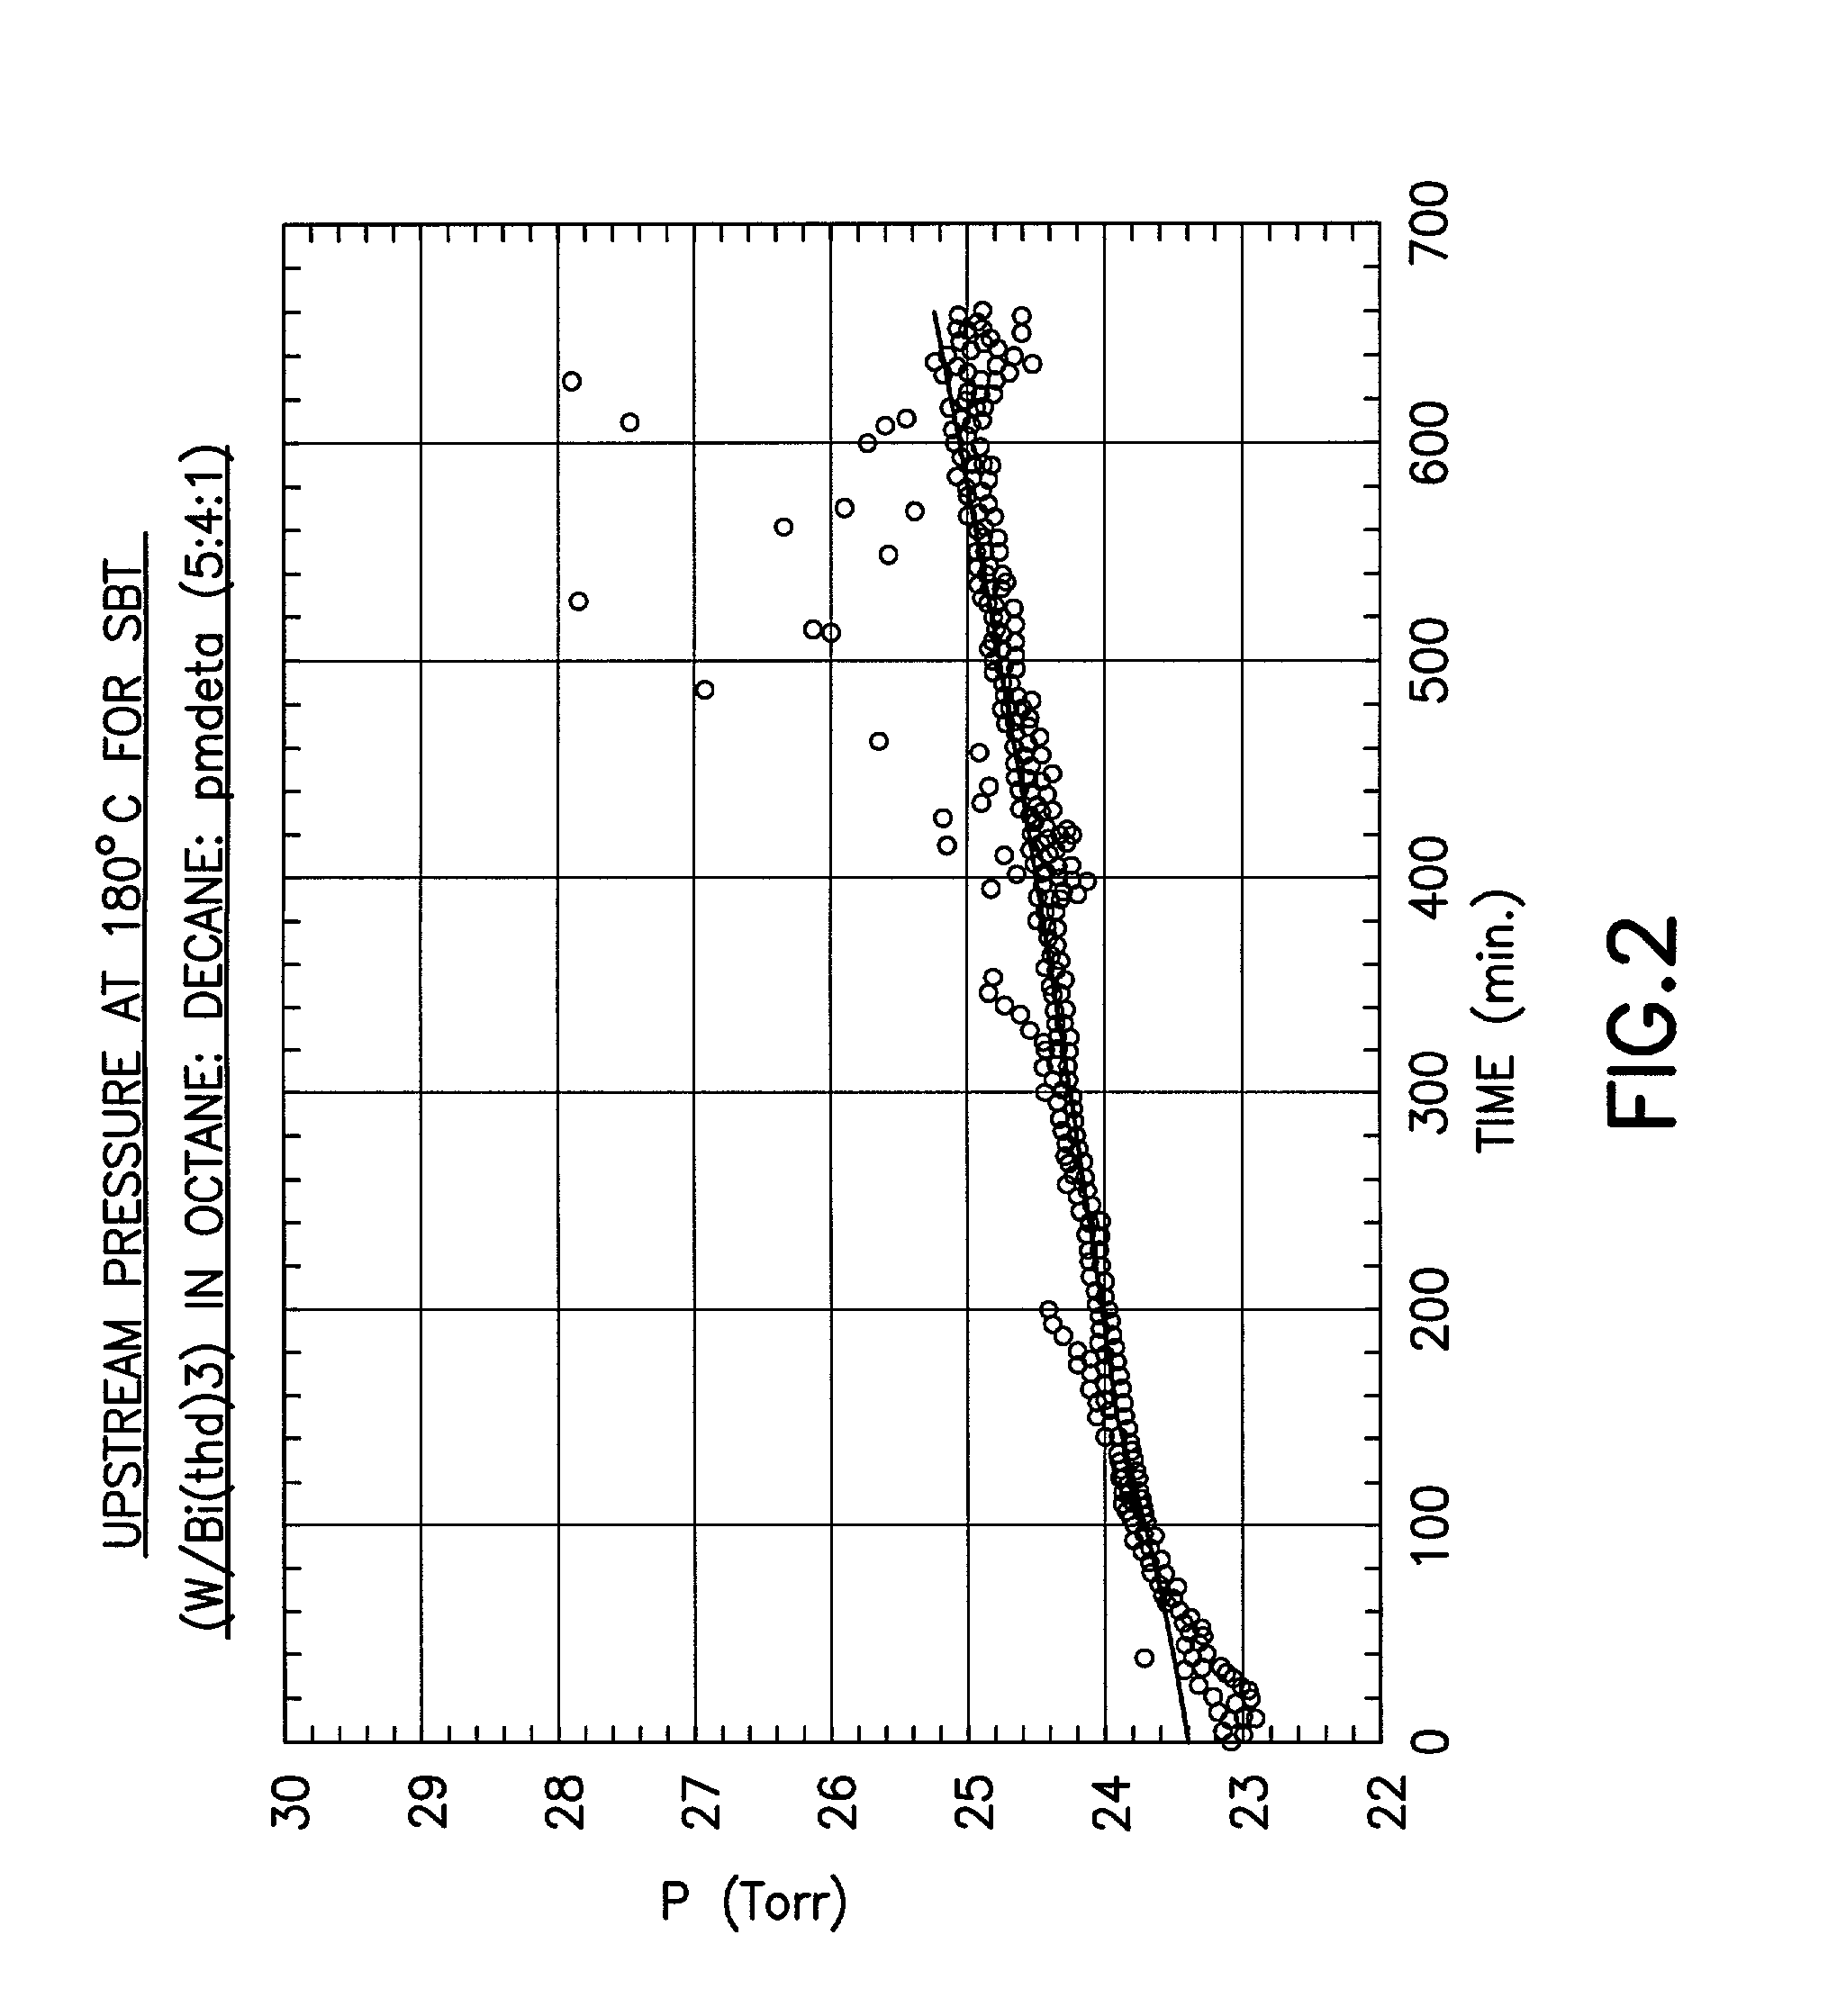 Alkane and polyamine solvent compositions for liquid delivery chemical vapor deposition